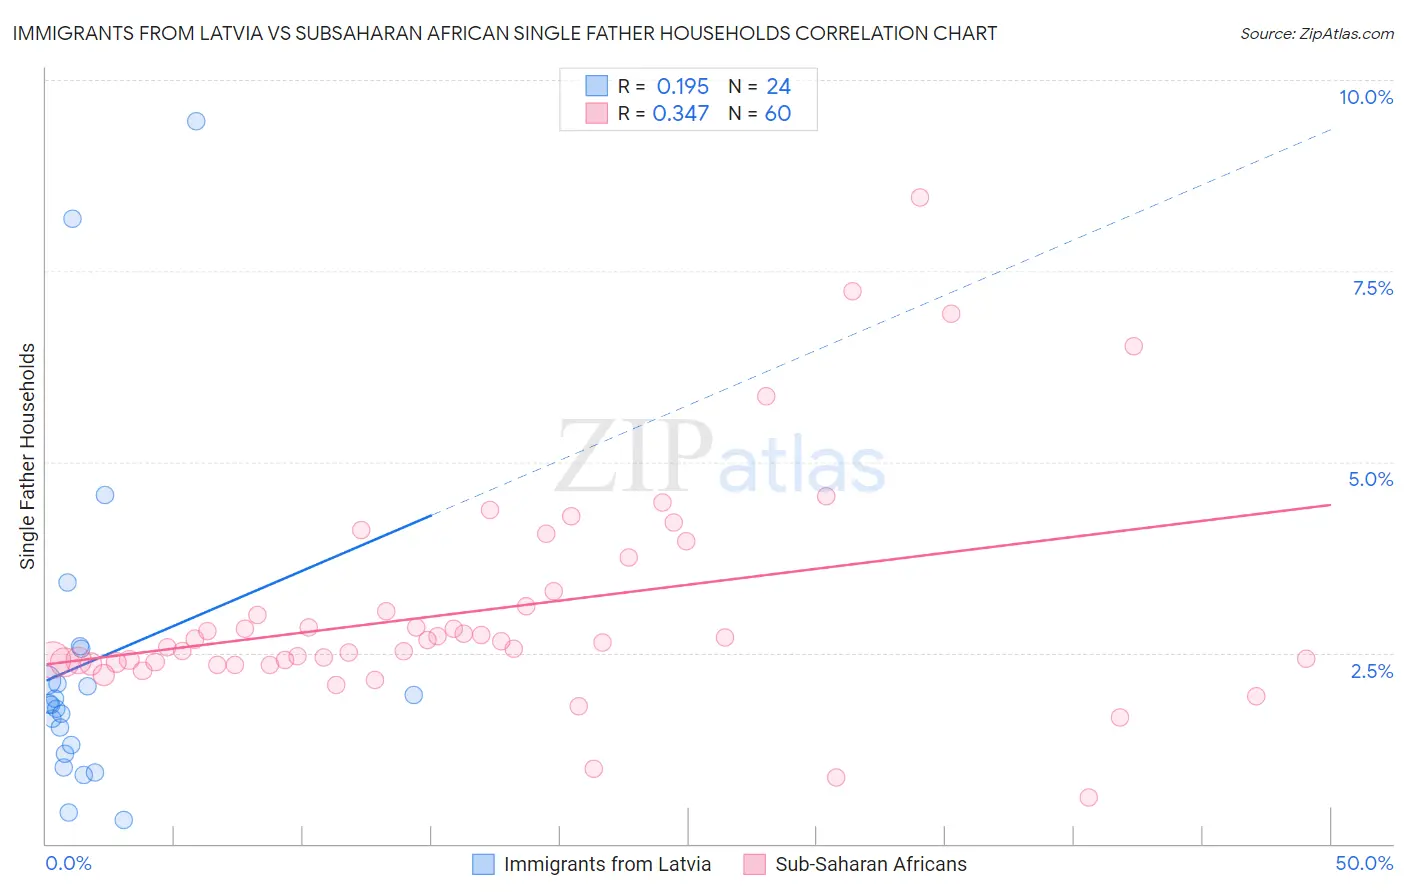 Immigrants from Latvia vs Subsaharan African Single Father Households